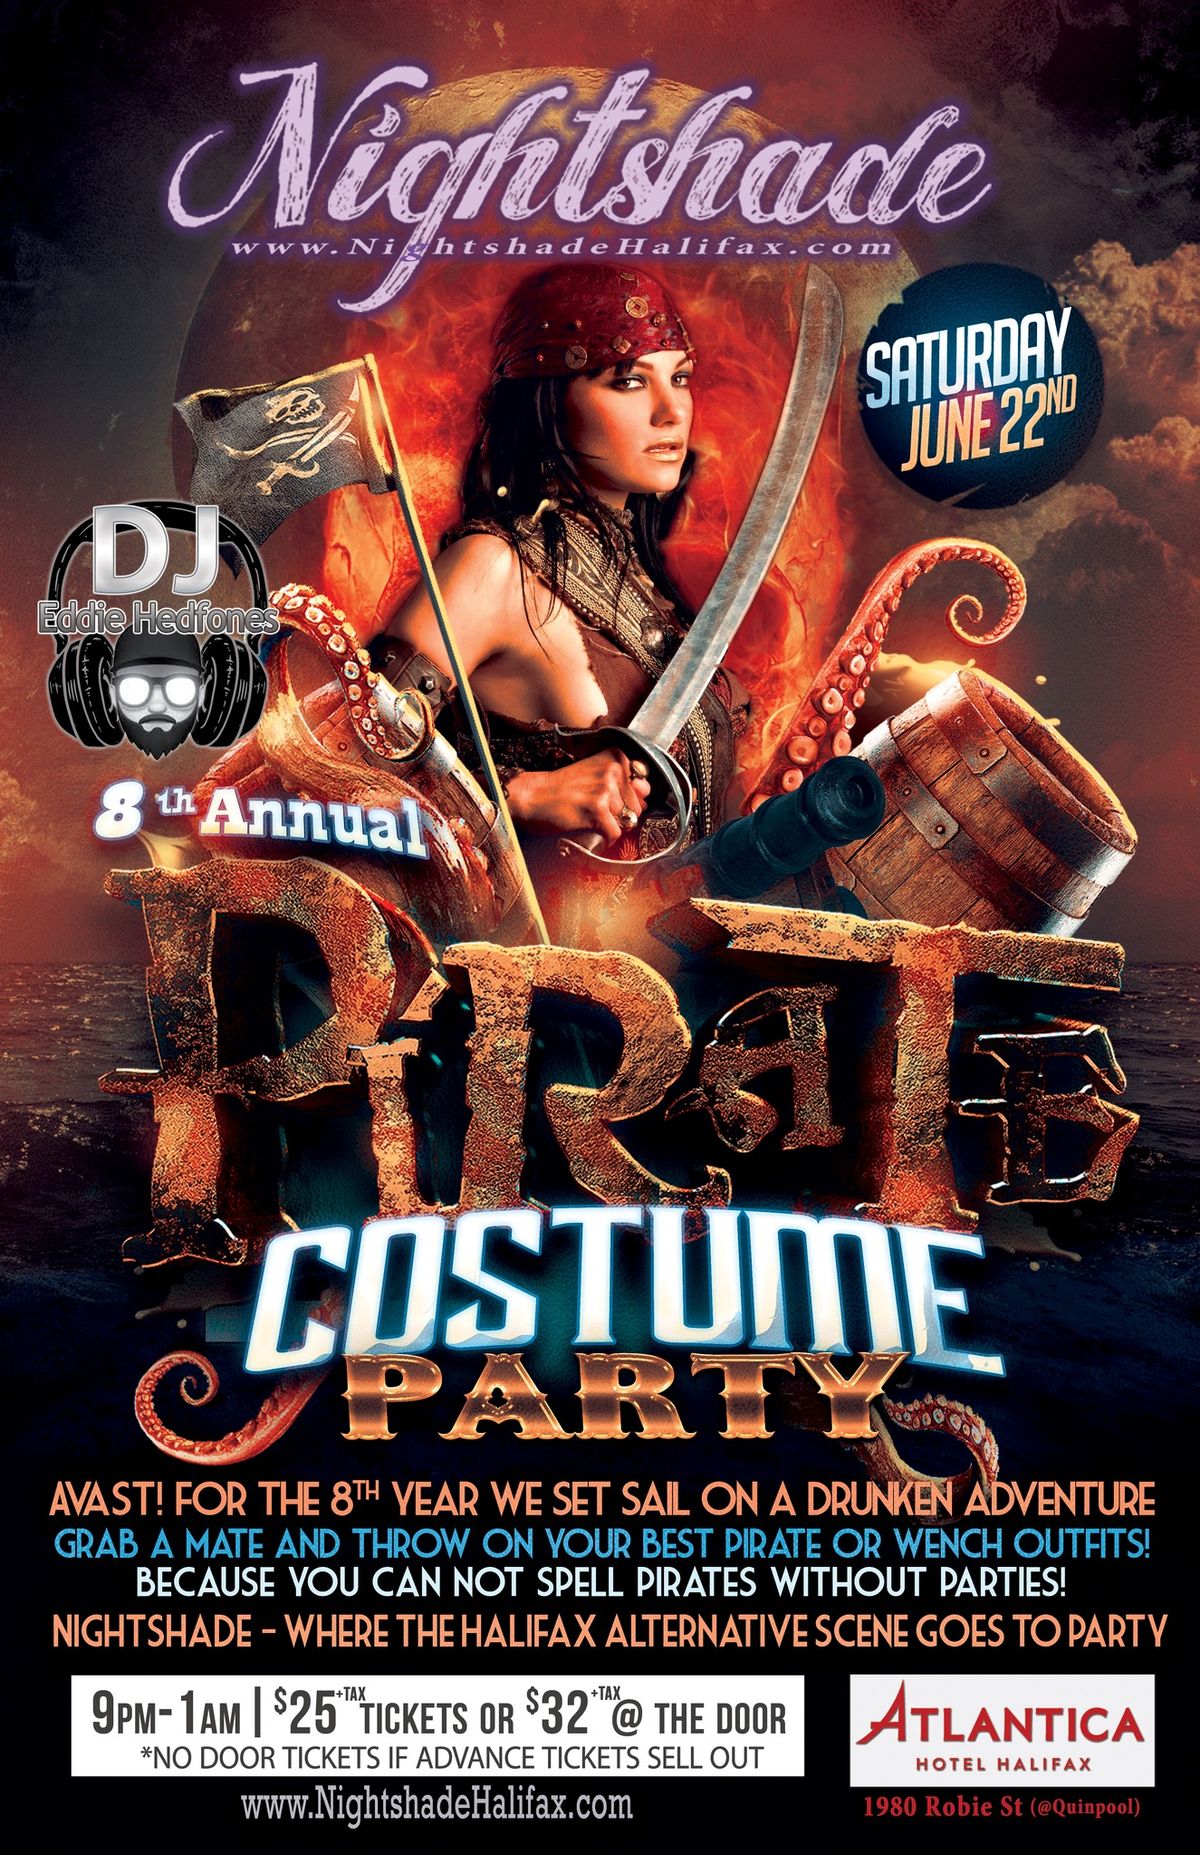 Nightshade - Pirate Costume Party, 8th Annual